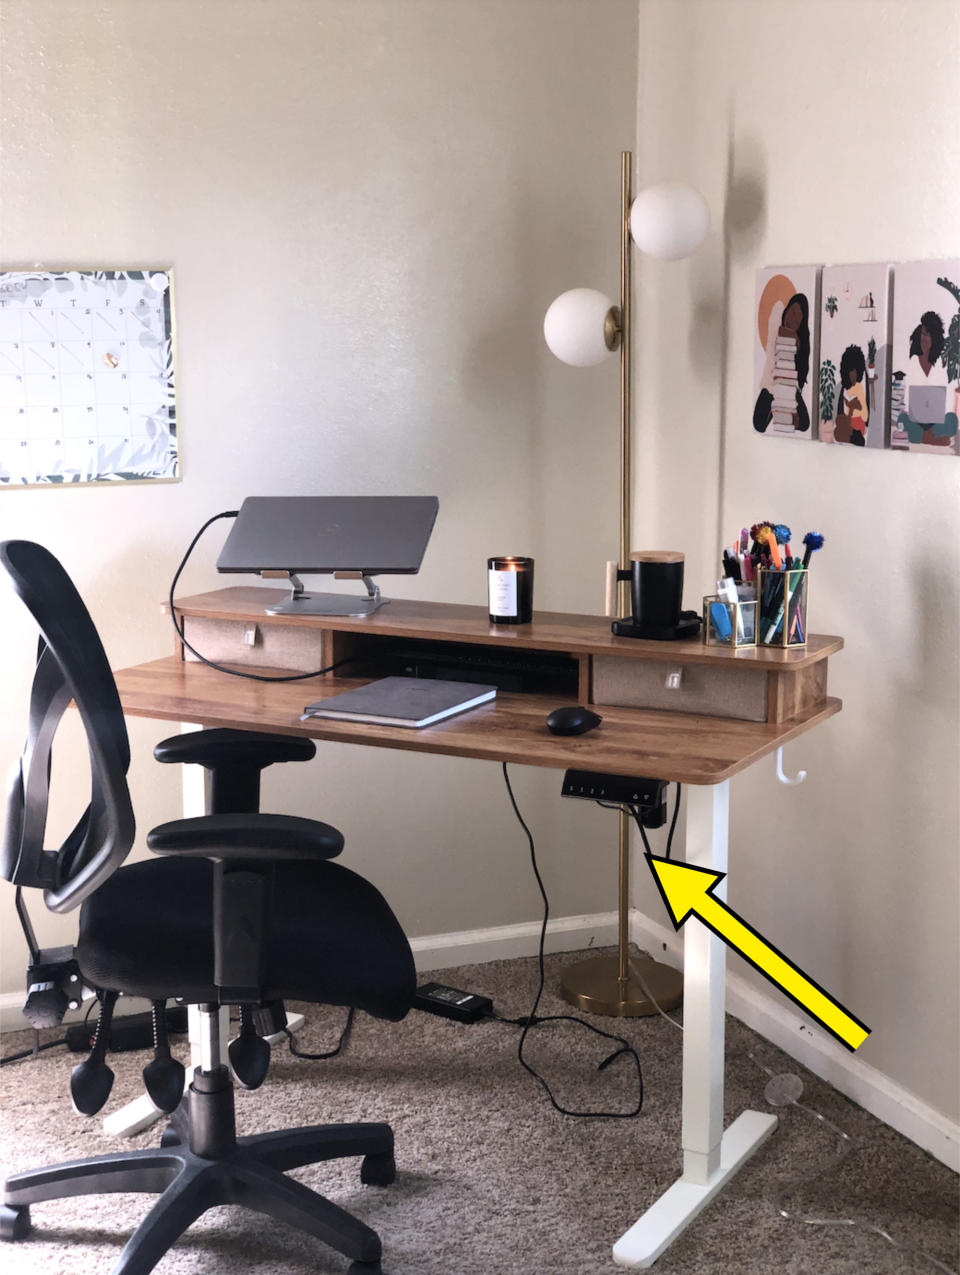 A well-organized home office setup with a wooden desk, ergonomic chair, lamp, and wall art. The desk has a laptop stand, pen holders, and a candle